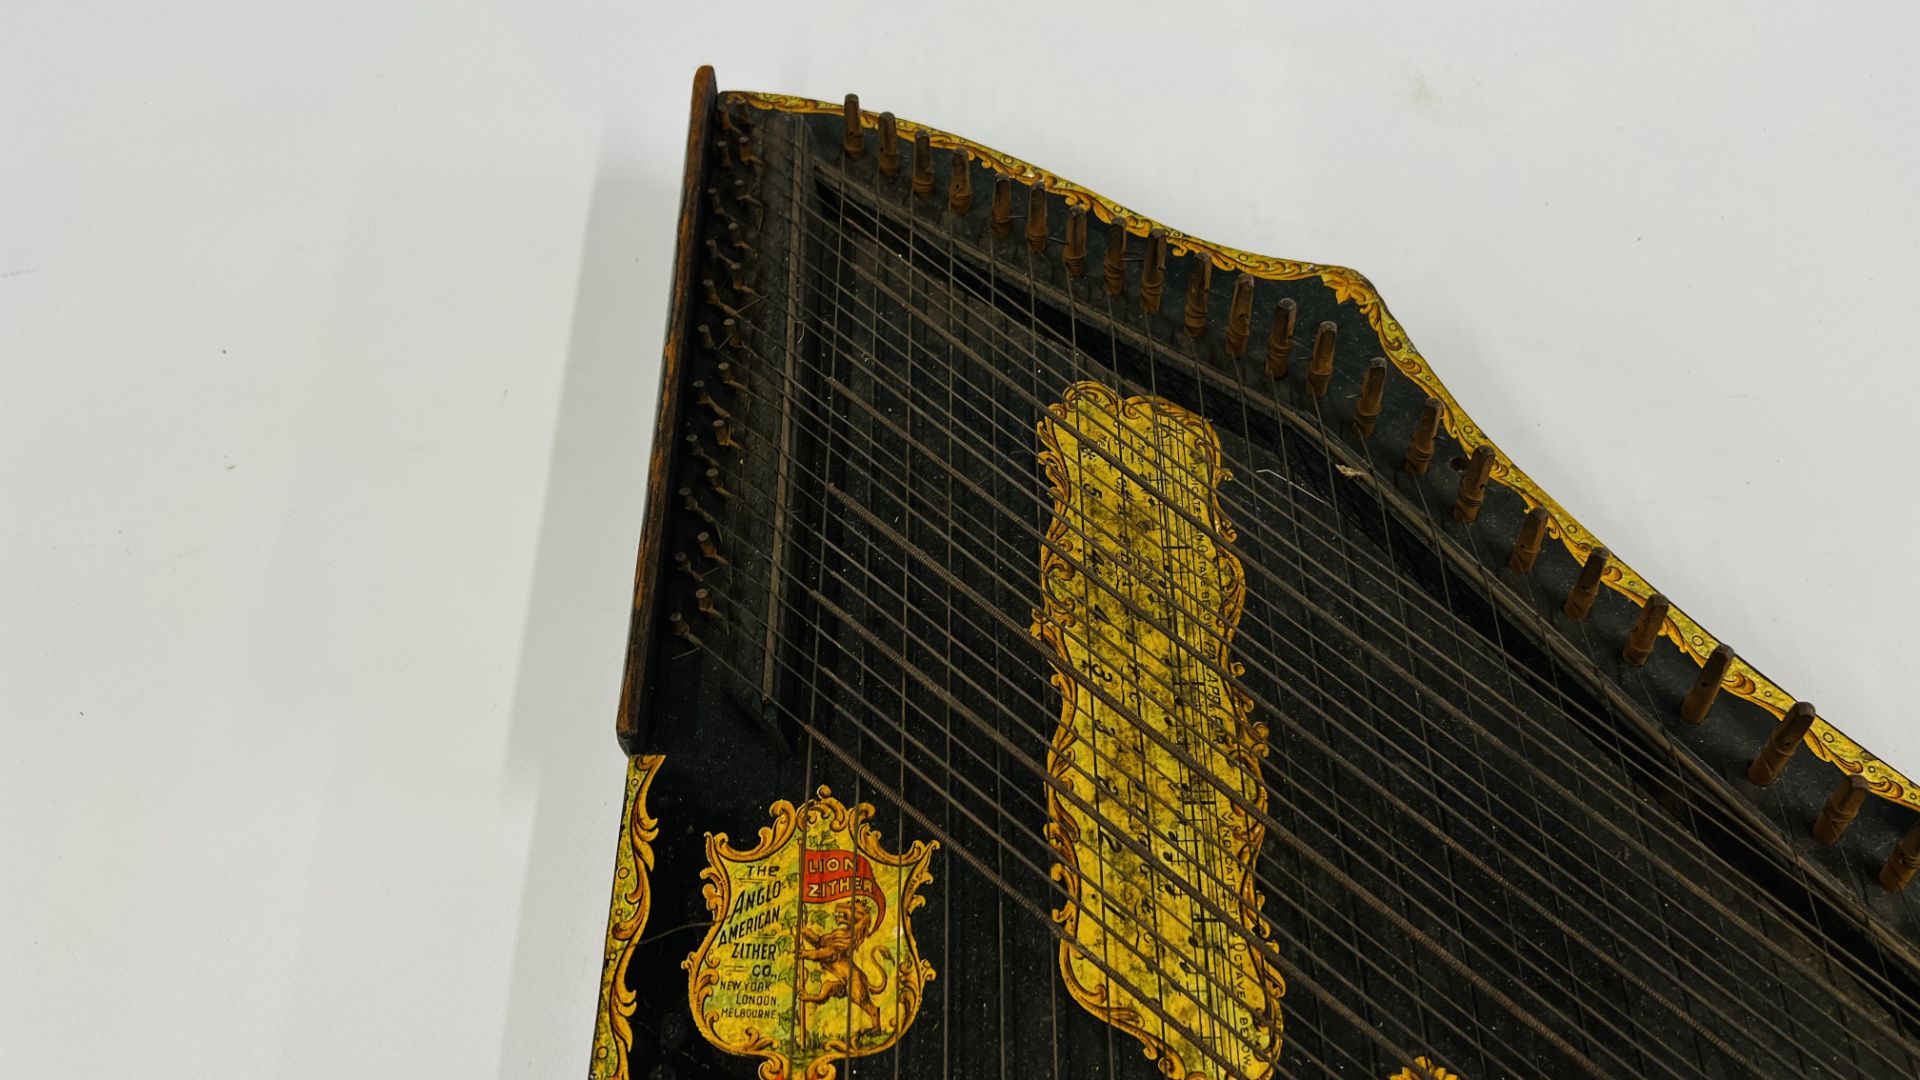 A VINTAGE "THE ANGLO AMERICAN LION ZITHER" MANUFACTURED BY THE ANGLO AMERICAN ZITHER Co NEW YORK - Image 8 of 13